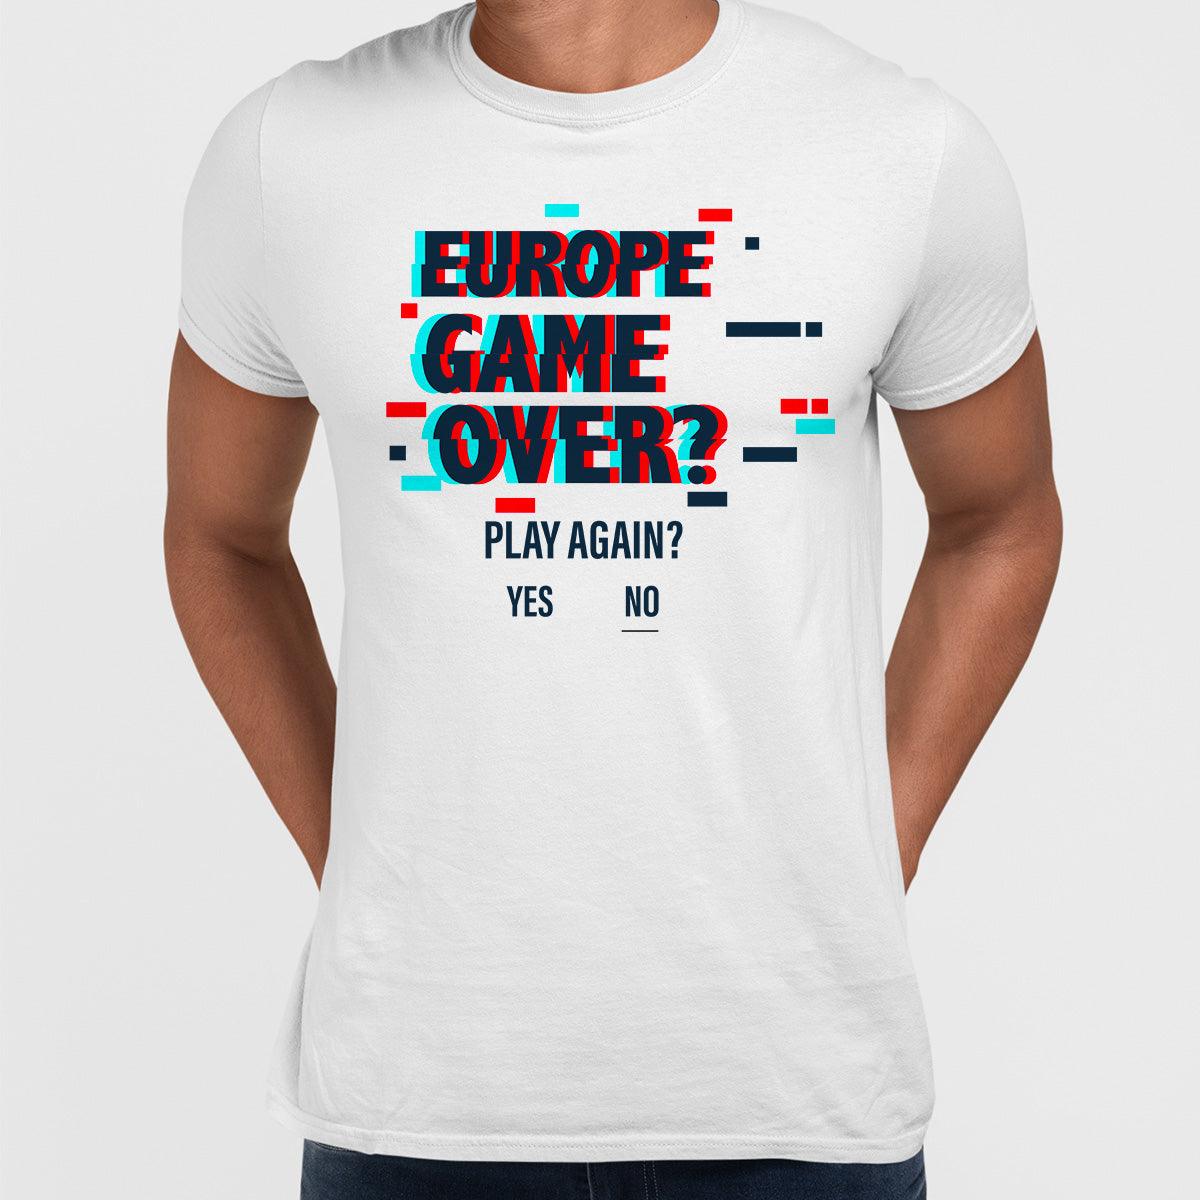 Brexit Day Europe Game Over - Kuzi Tees